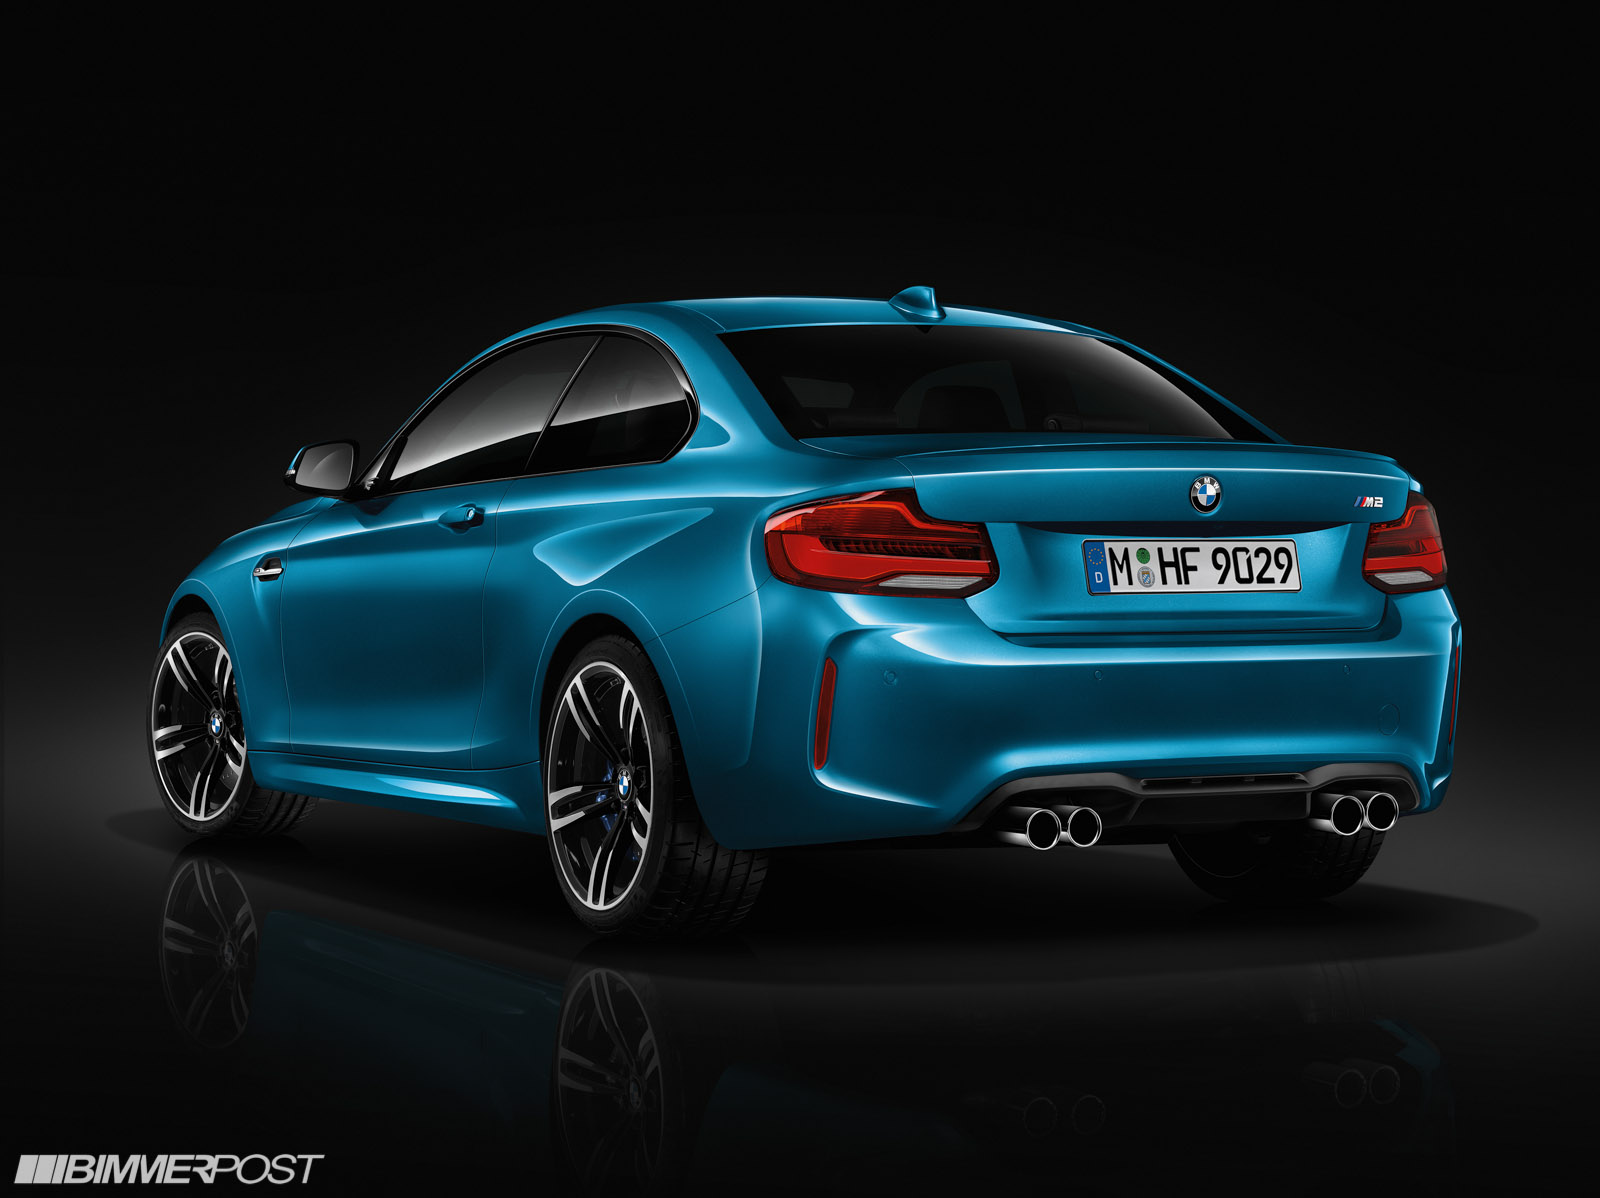 Official Photos of BMW M2 LCI Facelift